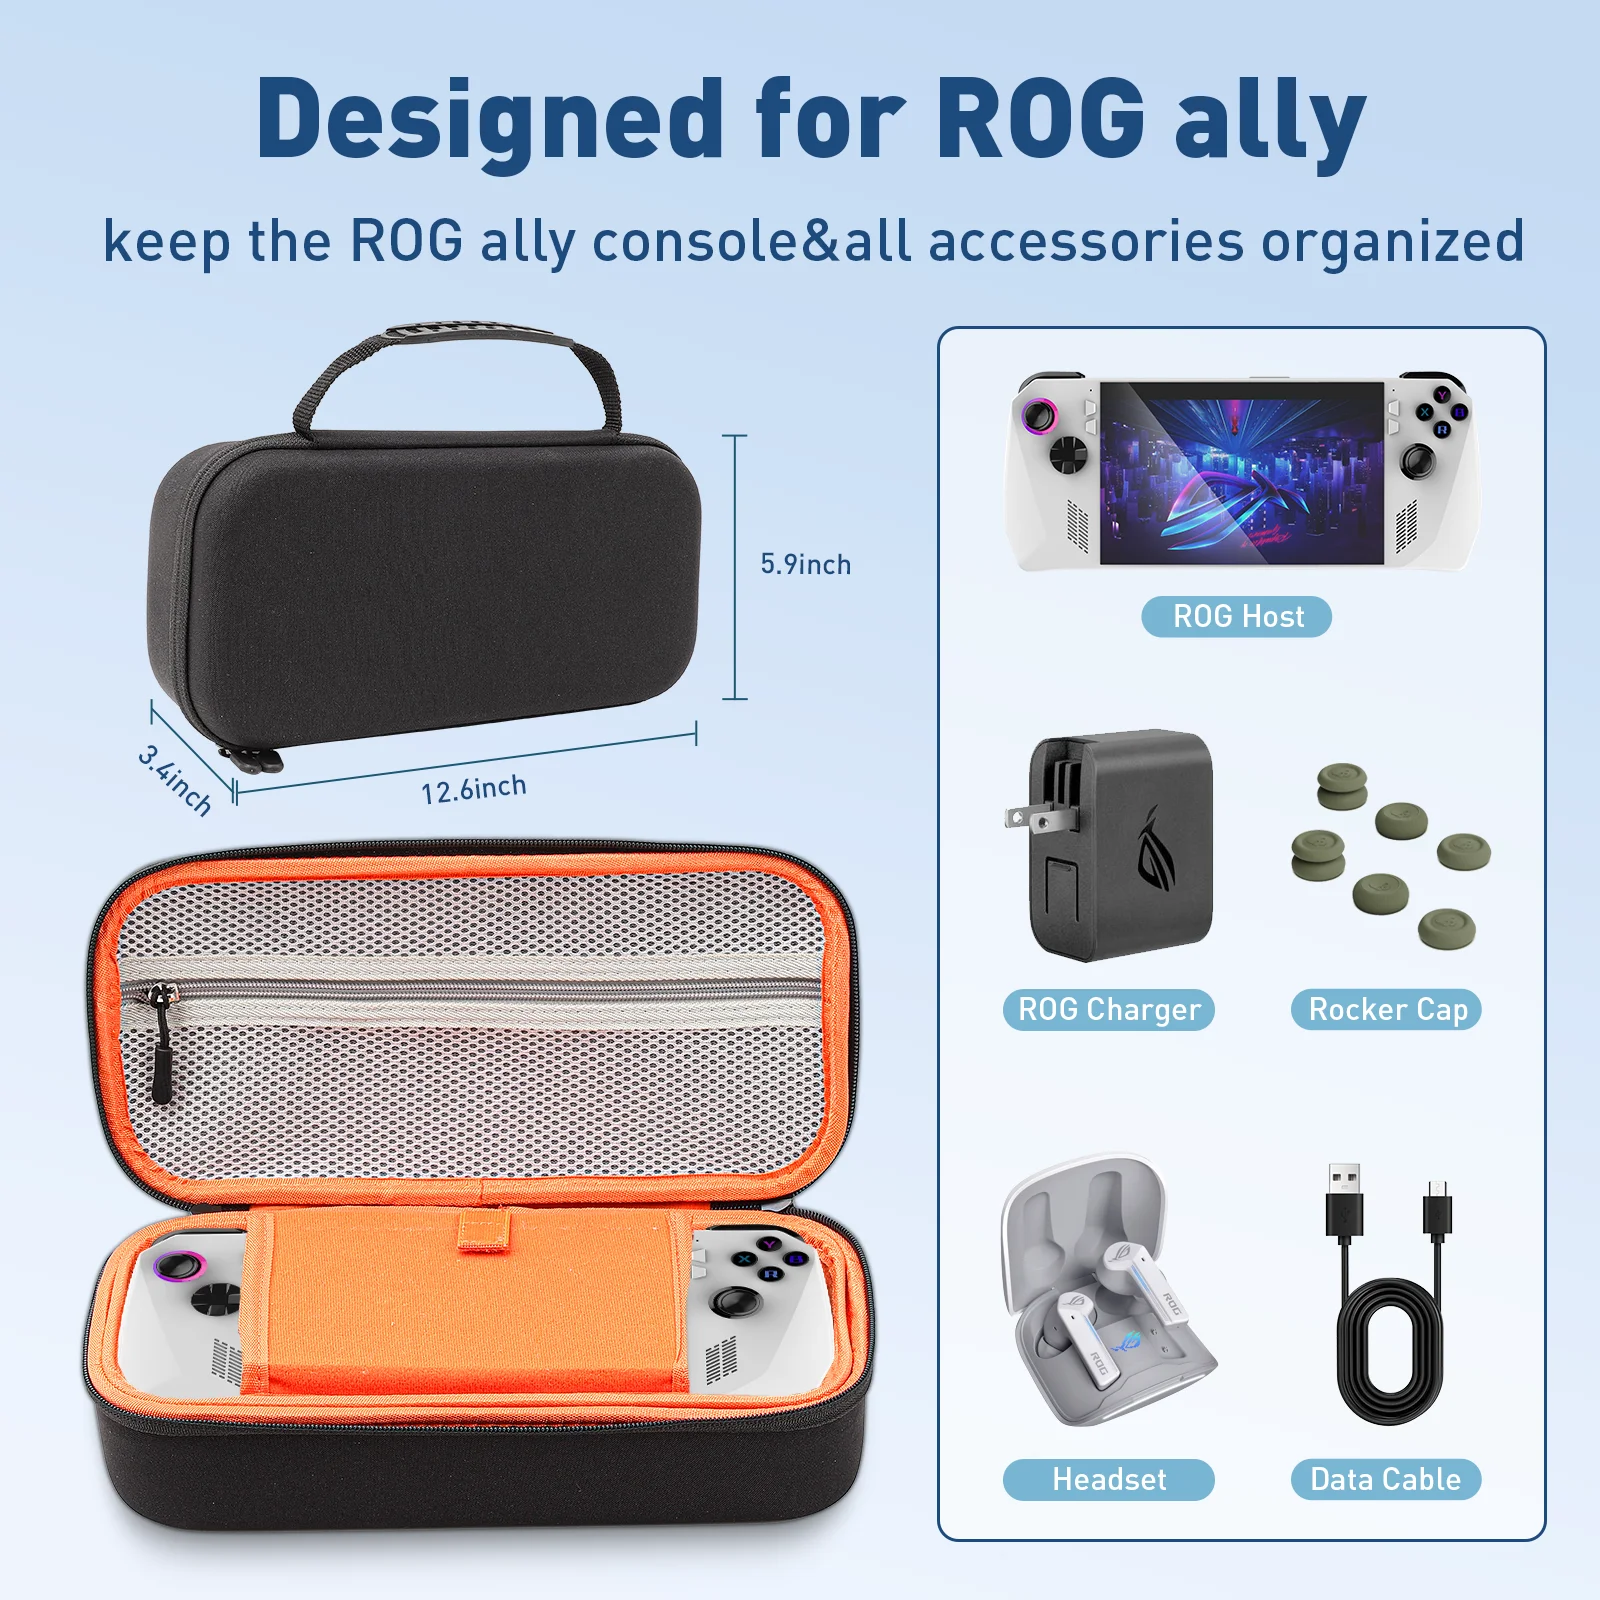 https://ae01.alicdn.com/kf/Sdcc4ae0d103c43e3a96f3831e535bb1am/Double-Layer-Carrying-Case-for-ROG-Protective-Hard-Shell-Portable-Travel-Case-Storage-Bag-for-ASUS.png